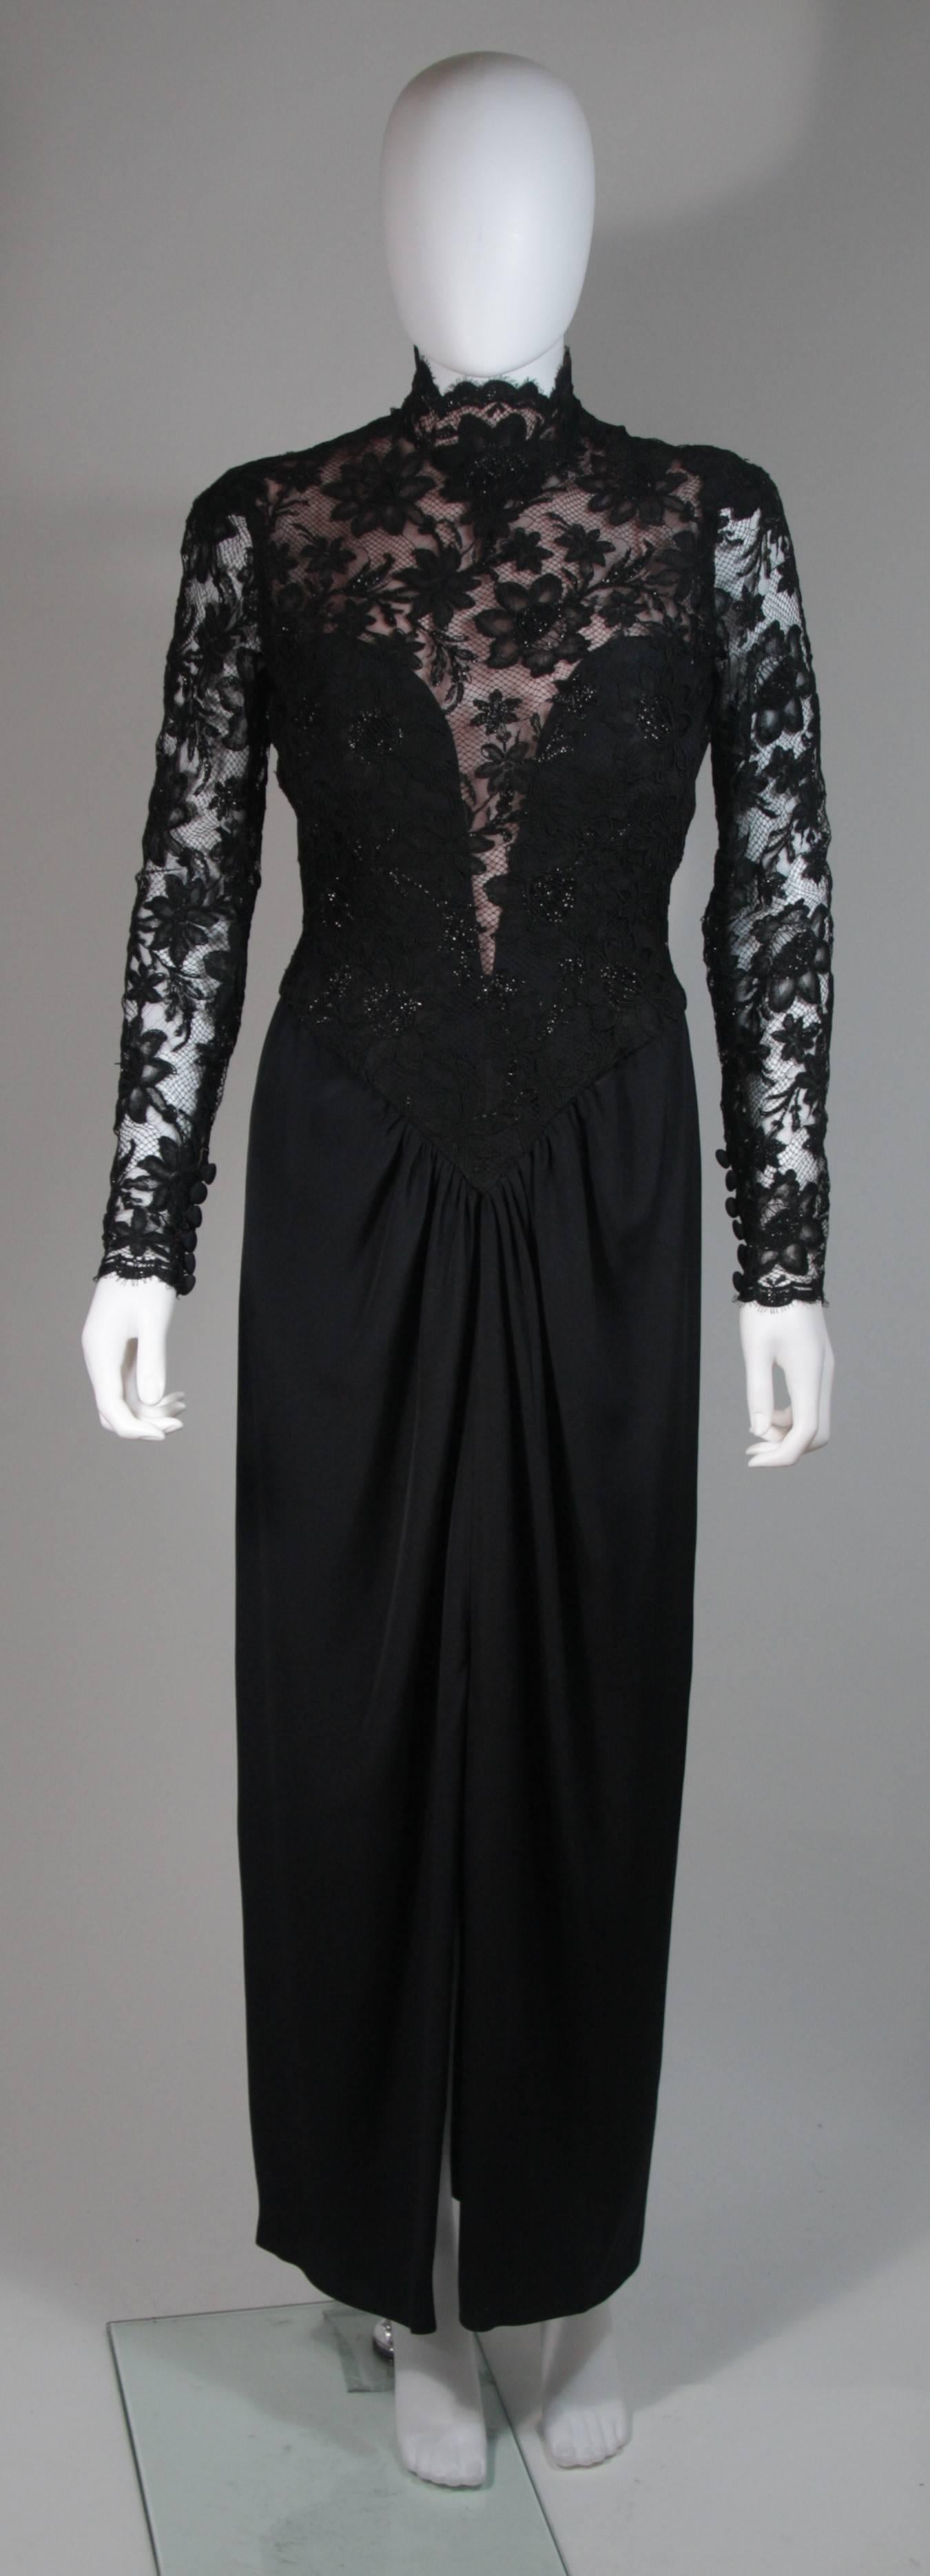 This Bob Mackie design is available for viewing at our Beverly Hills Boutique. We offer a large selection of evening gowns and luxury garments. 

 This gown is composed of black lace and jersey. The lace bodice features a mock neck and scalloped